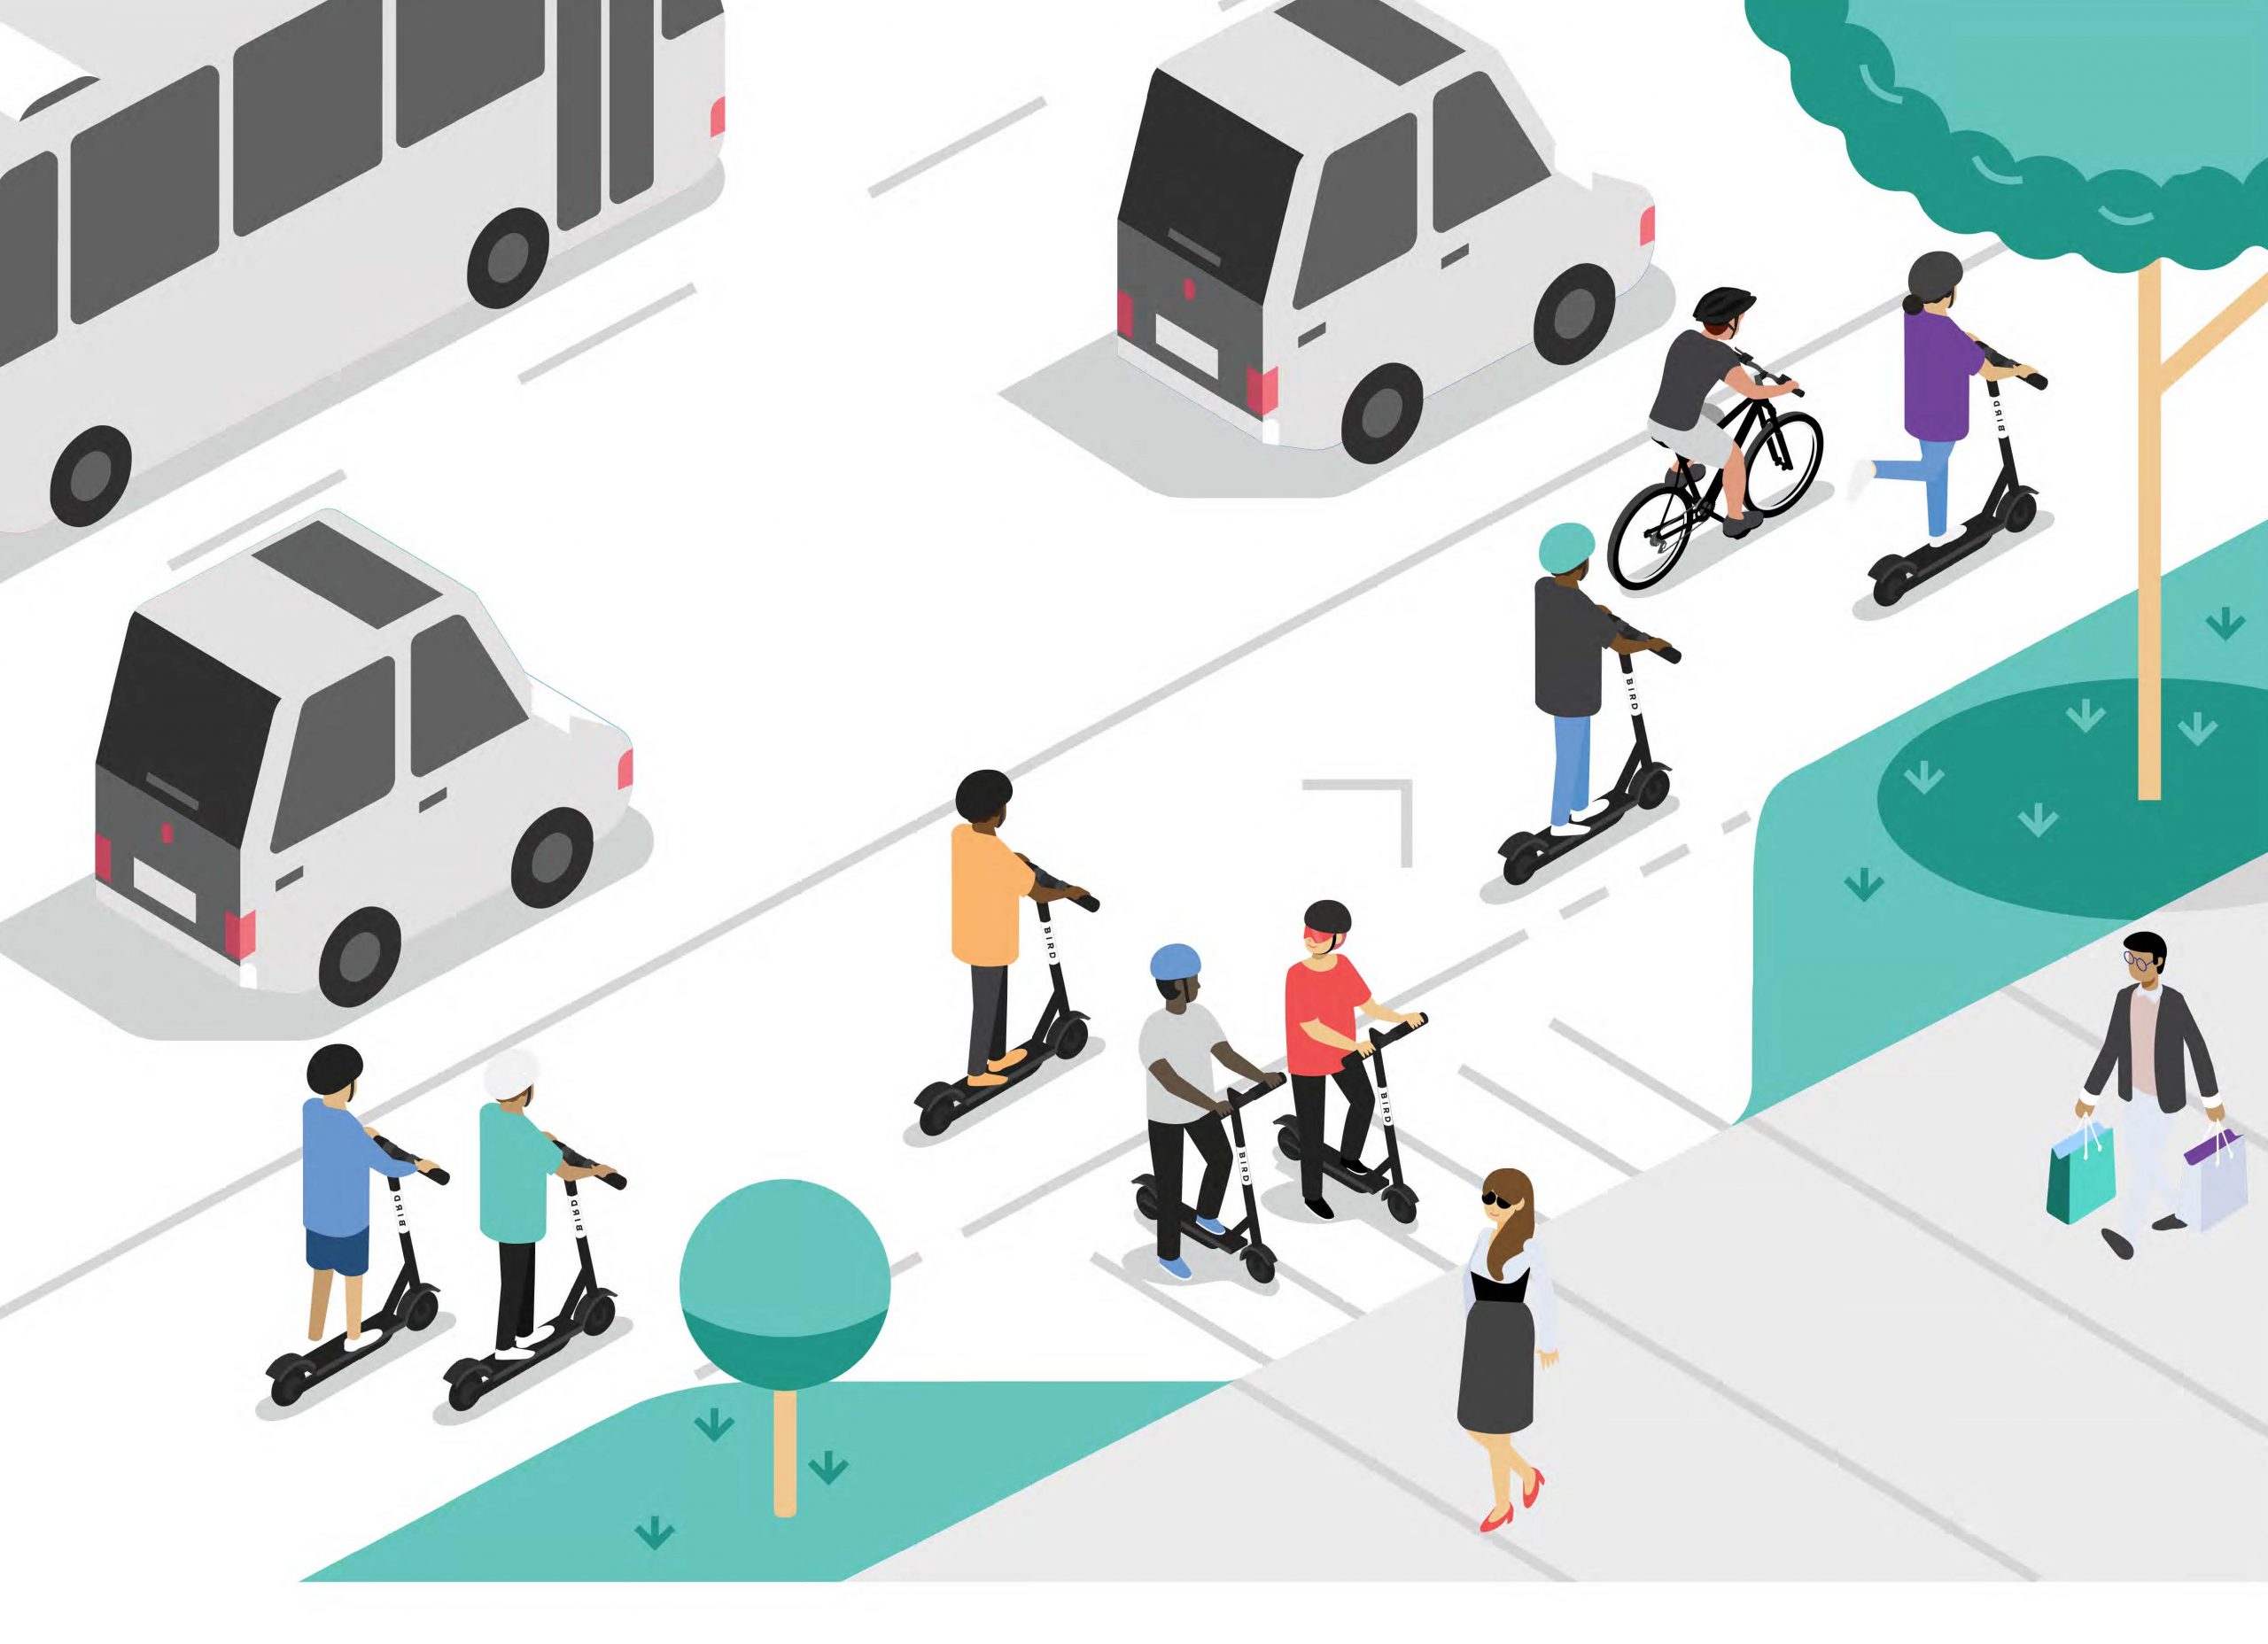 illustration of e-bikes and s-scooters sharing wys with vehicles and pedestrians Illustration